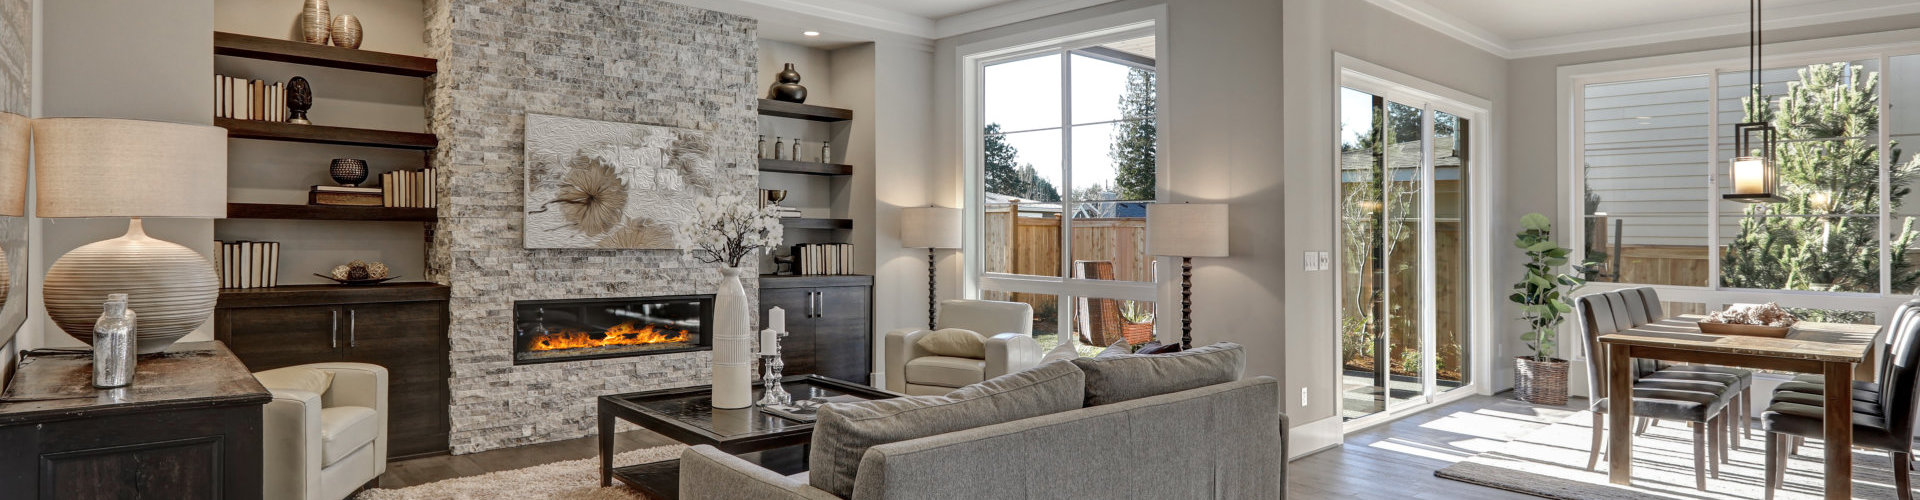 living room interior in gray and brown colors features gray sofa atop dark hardwood floors facing stone fireplace with built-in shelves